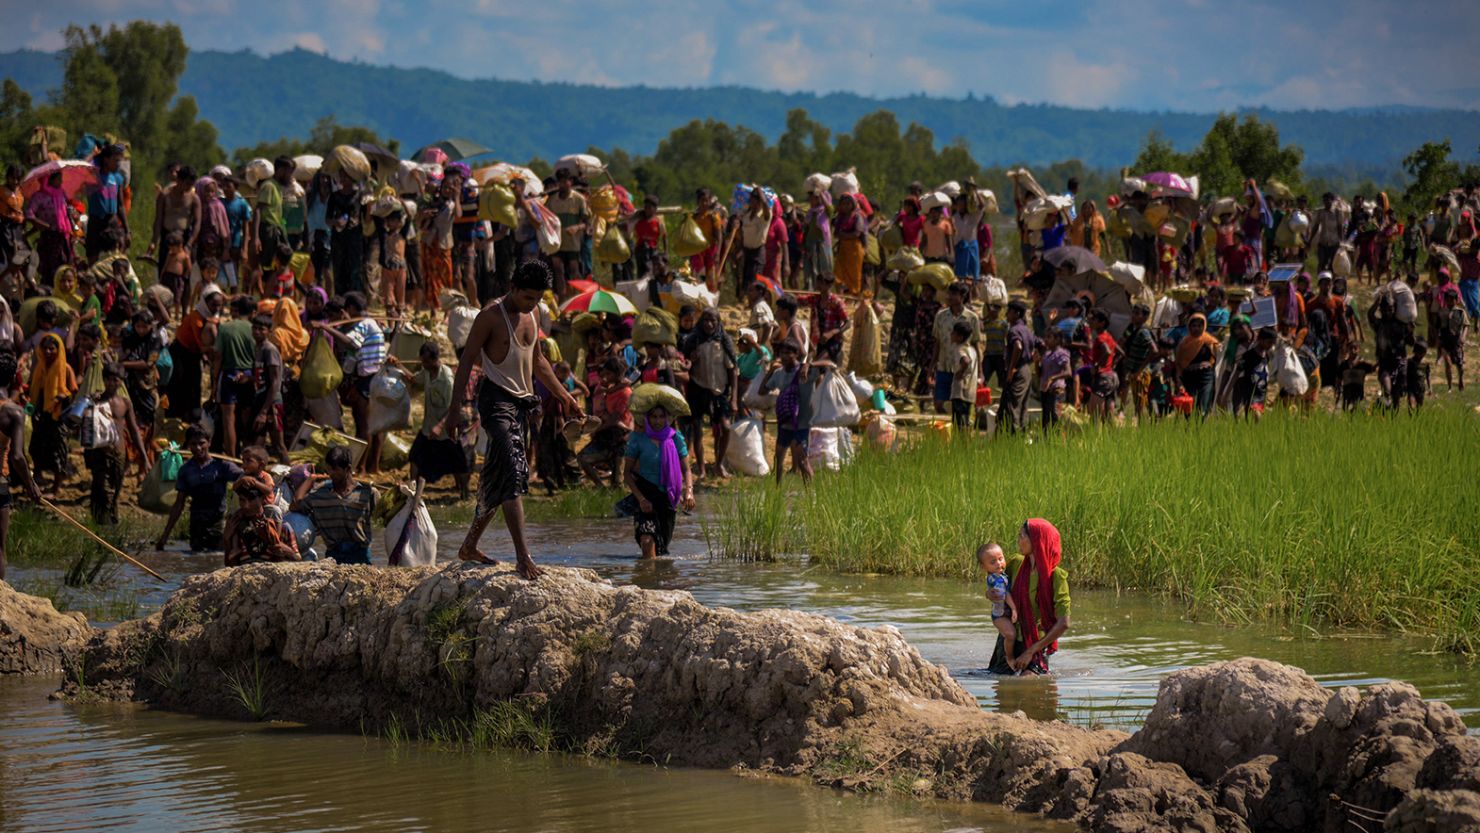 Rohingya refugees, fleeing military operations in Myanmar's Rakhine state, try to cross the border in Palongkhalii of Cox's Bazar, Bangladesh on October 16, 2017. 